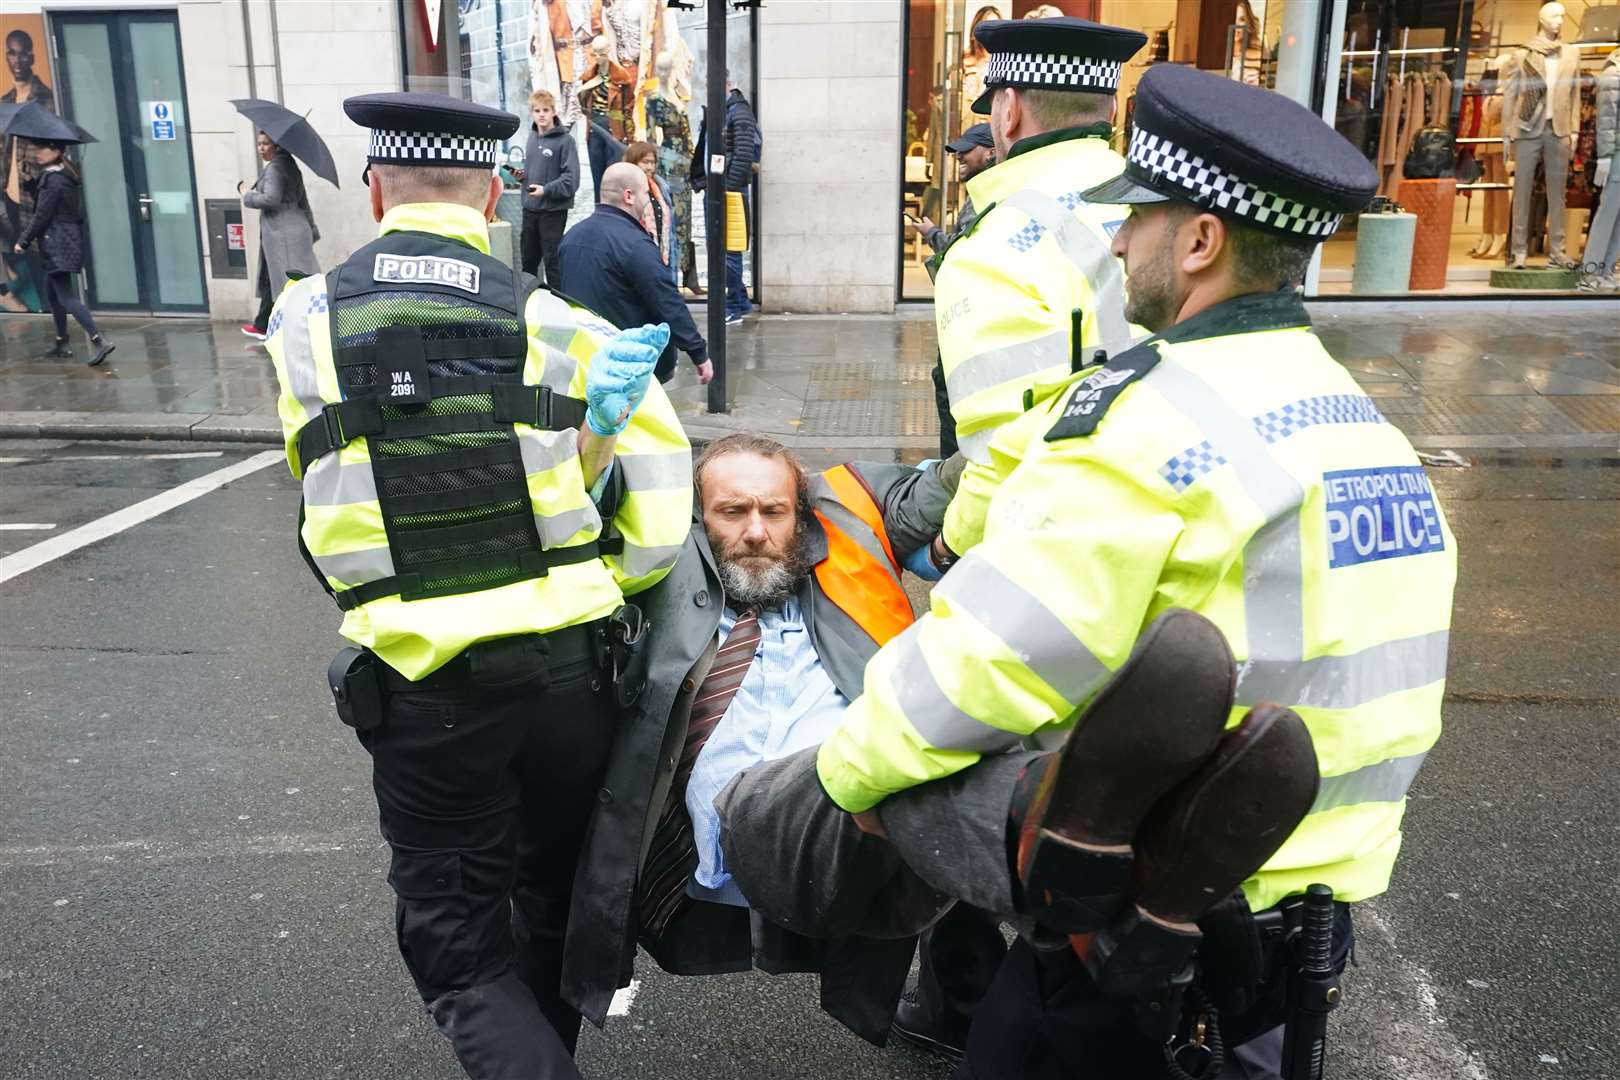 Police officers deal with activists from Just Stop Oil during their protest outside Harrods department store in Knightbridge, London in October (Ian West/PA)